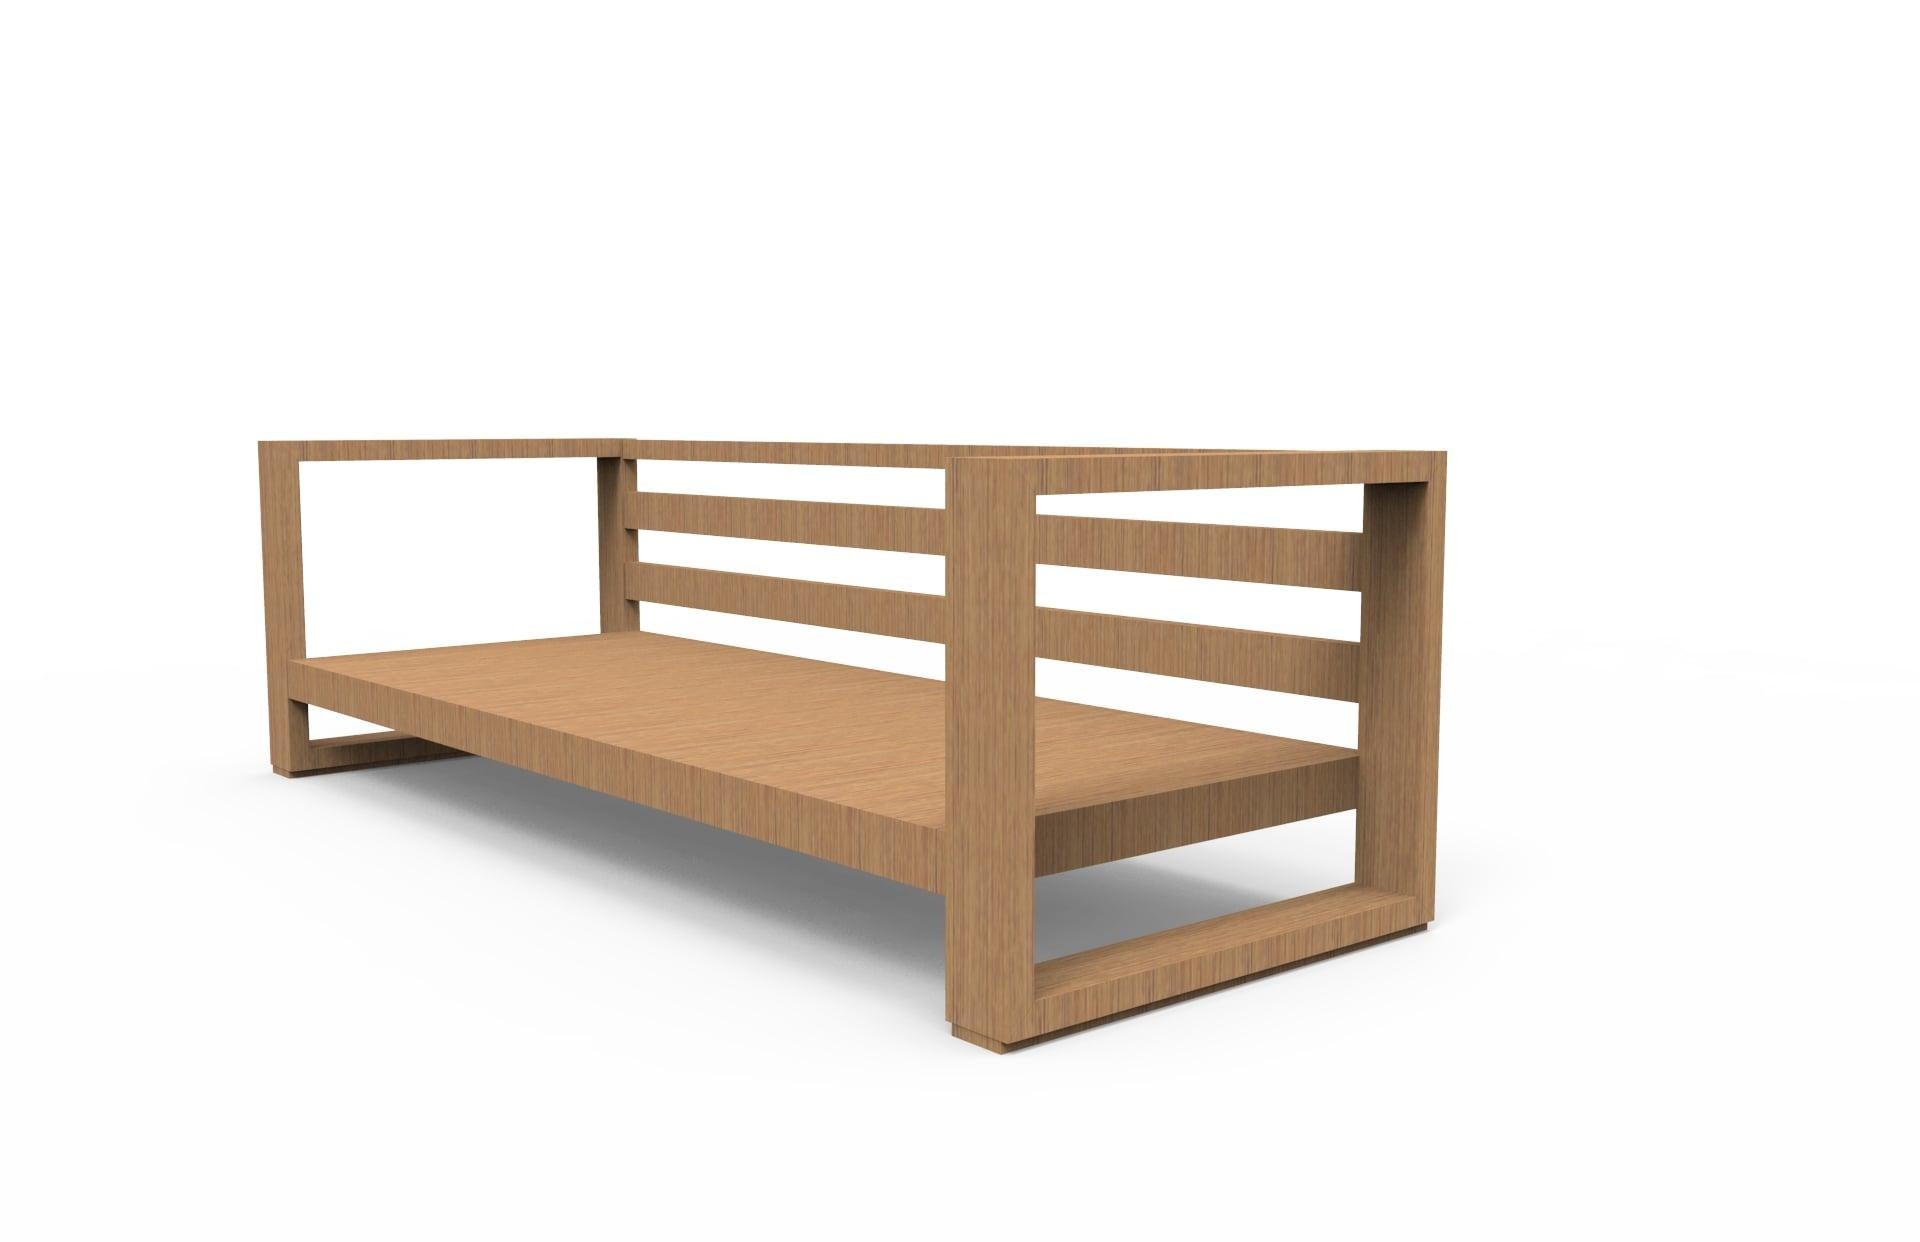 Hand-Crafted Brixton Teak Sofa 'Grade a' Wire Brushed Natural Wood, Canvas Natural For Sale